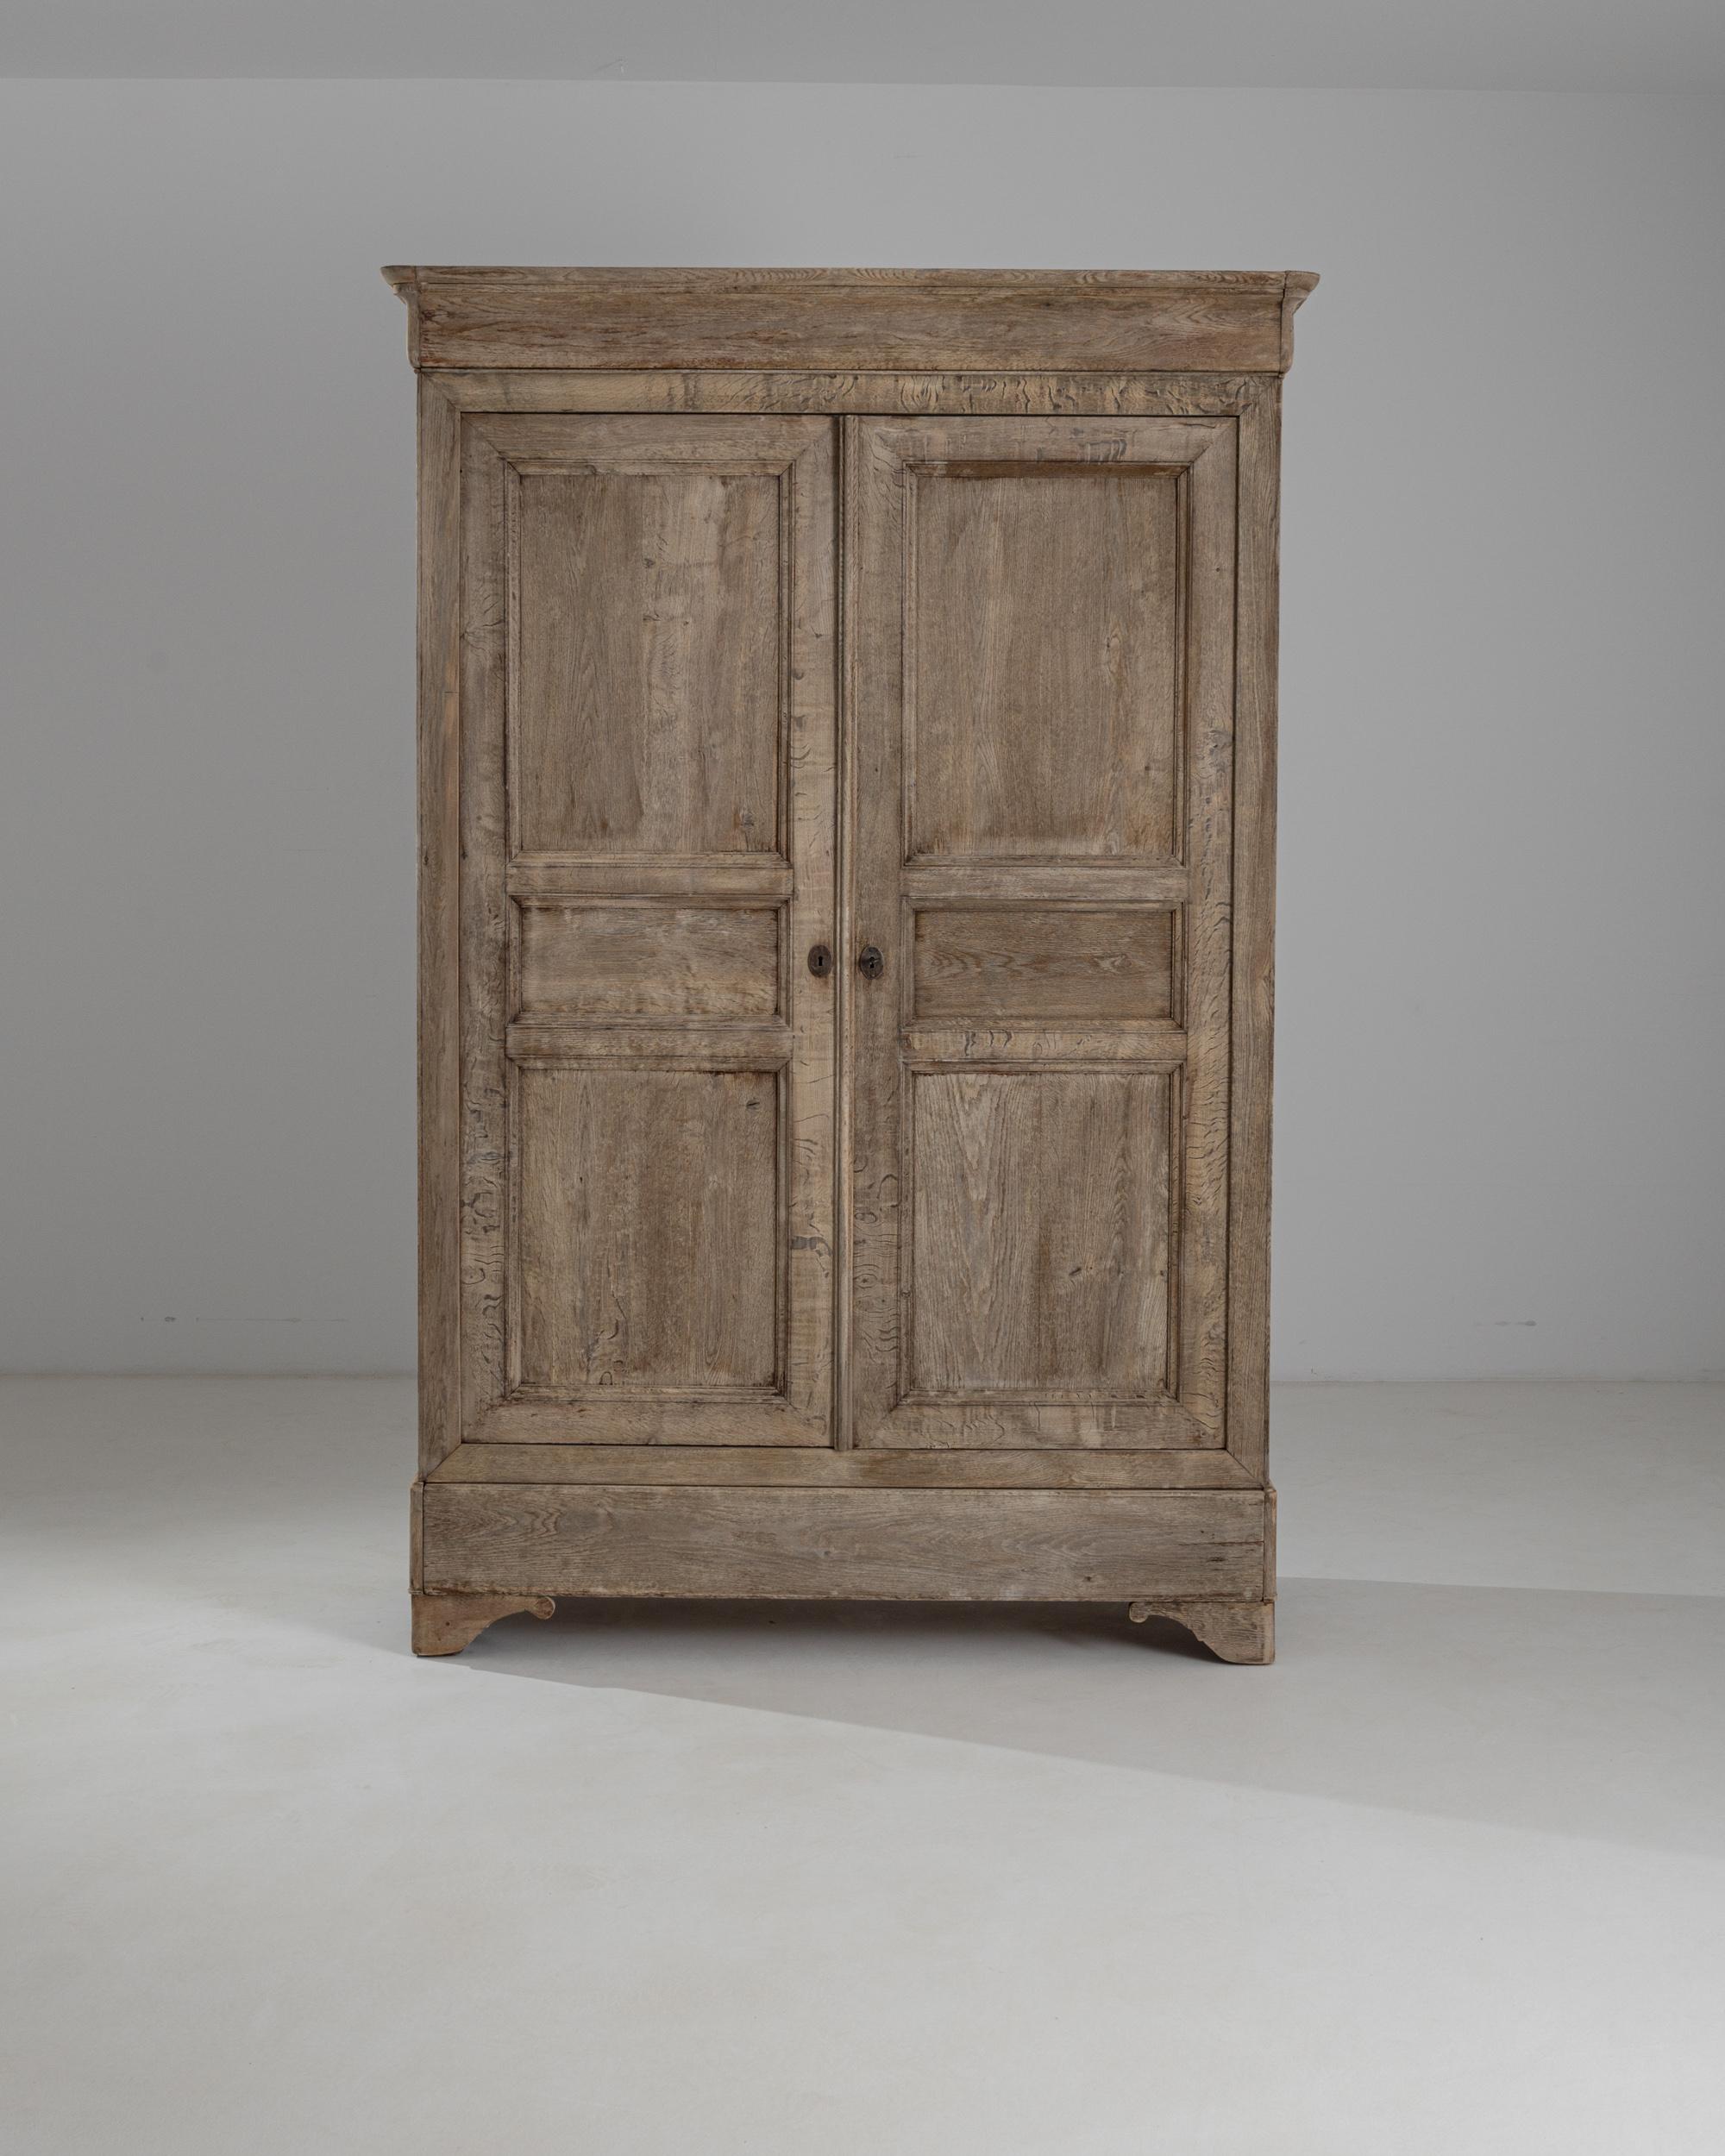 This tall wooden armoire was produced in France, circa 1880. A poised and spacious armoire standing on scrolled bracket feet, featuring a sober cornice top, a large bottom drawer and a three-shelf case. The wood has been carefully restored in our